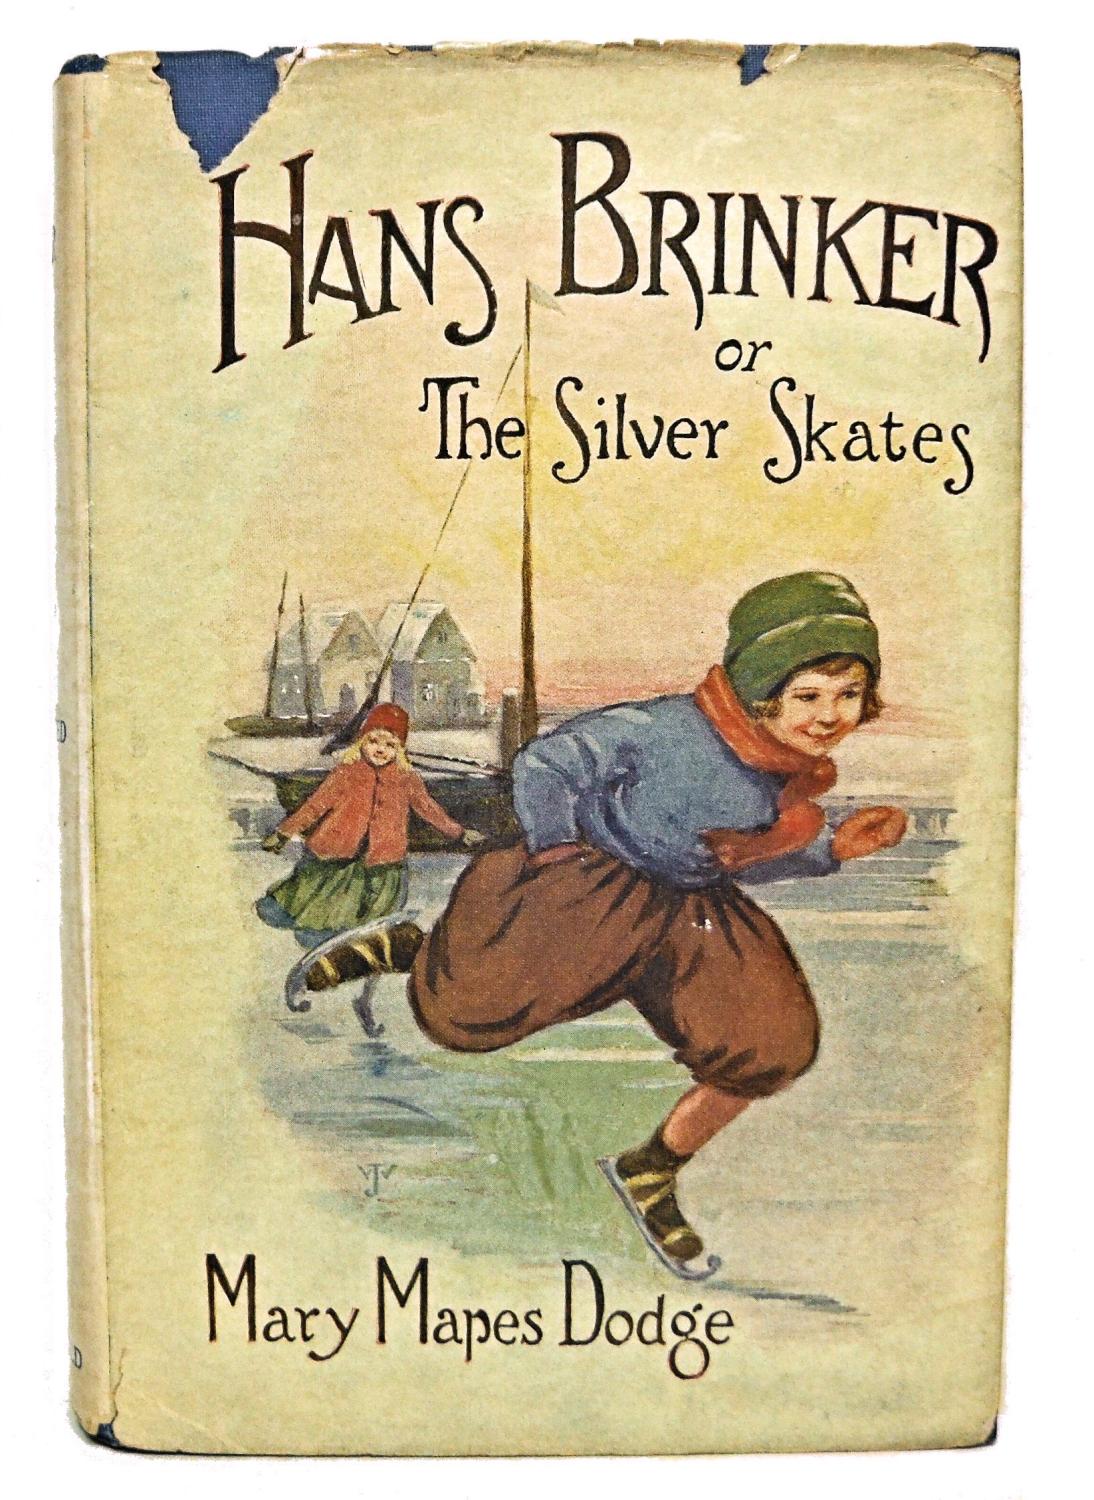 Hans brinker or the silver skates by mary mapes dodge Hans Brinker Or The Silver Skates By Mary Mapes Dodge Very Good Very Good Book Hardcover Rose City Books